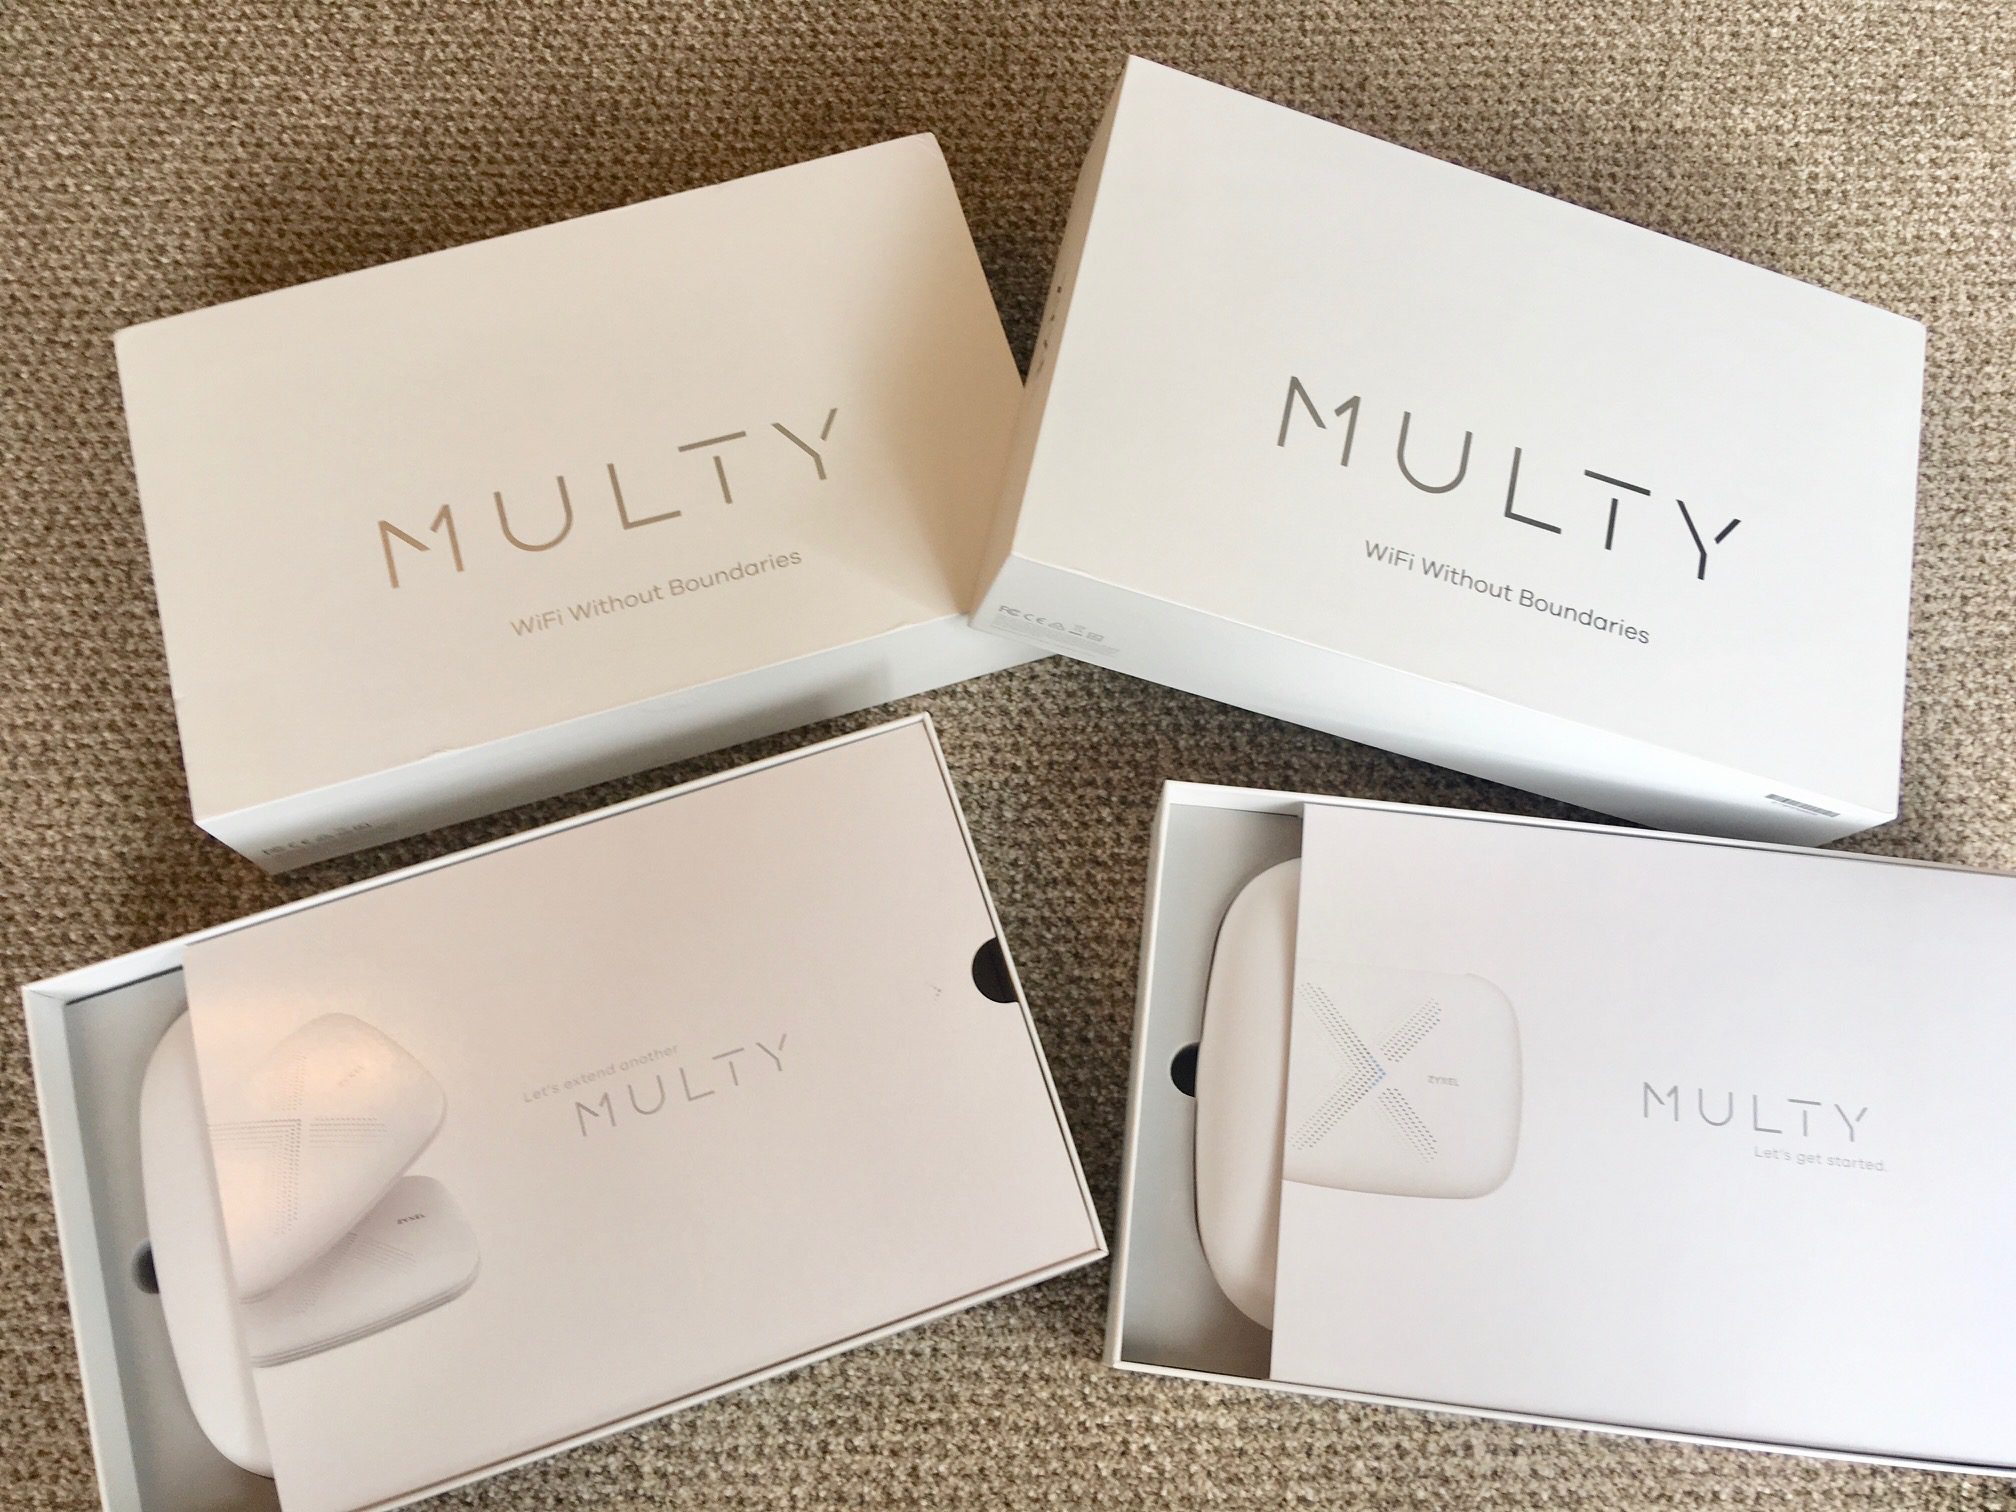 REVIEW – Multy X AC3000 Tri-Band WiFi System